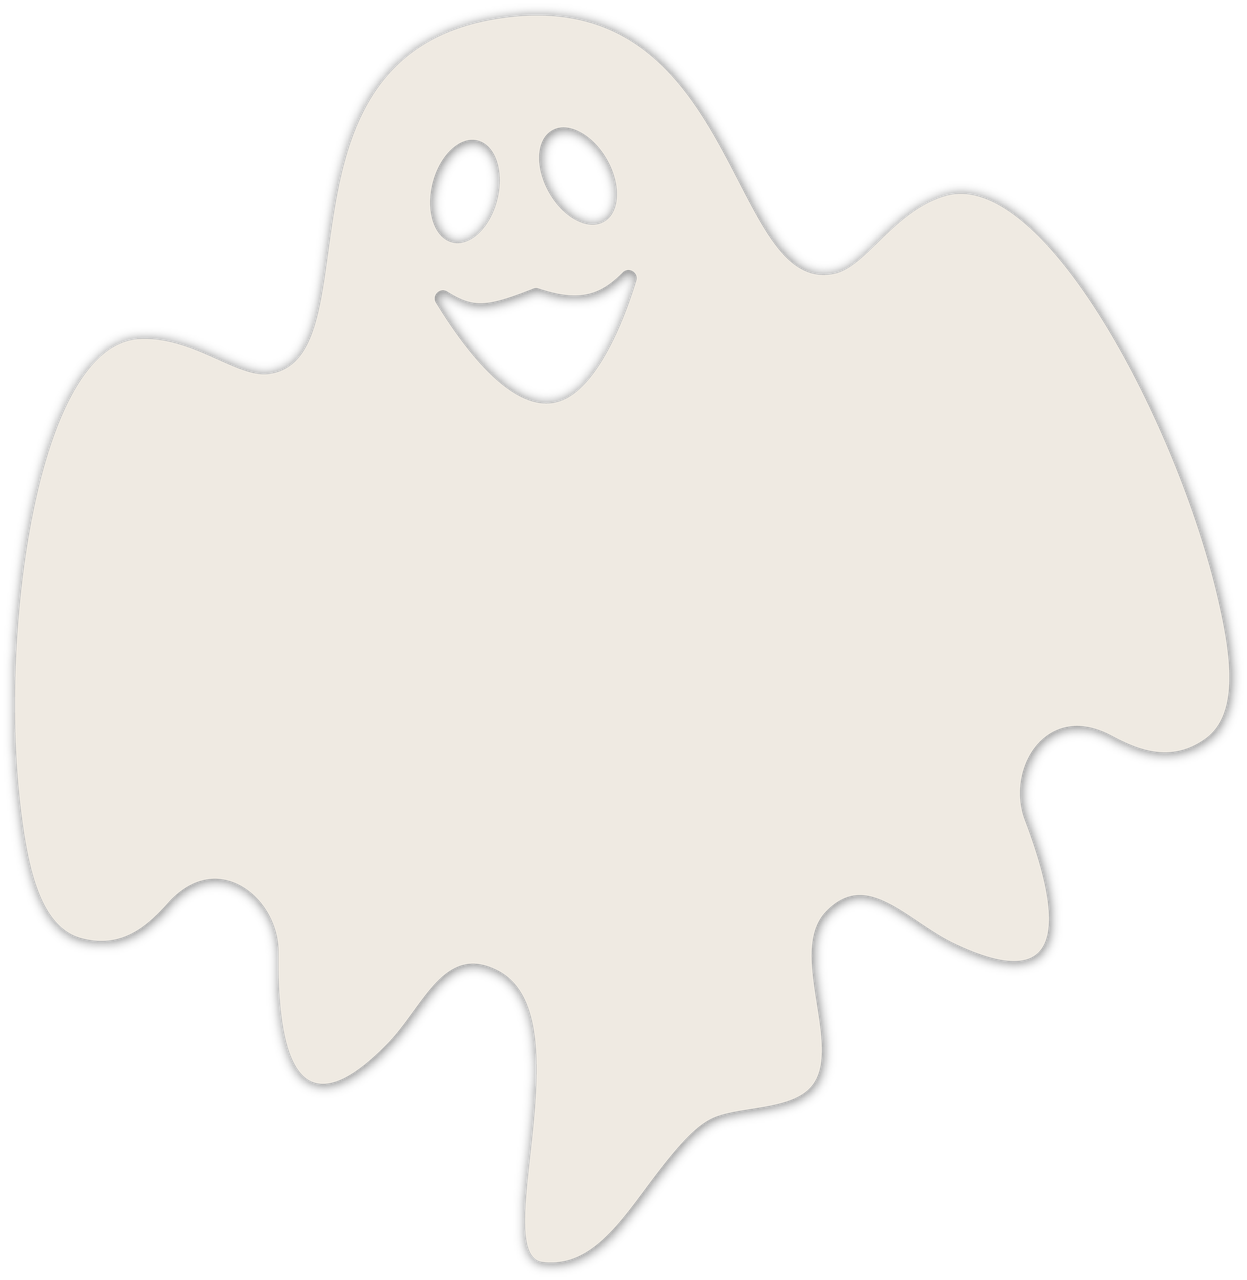 Download Ghost #2 SVG Cut File - Snap Click Supply Co.